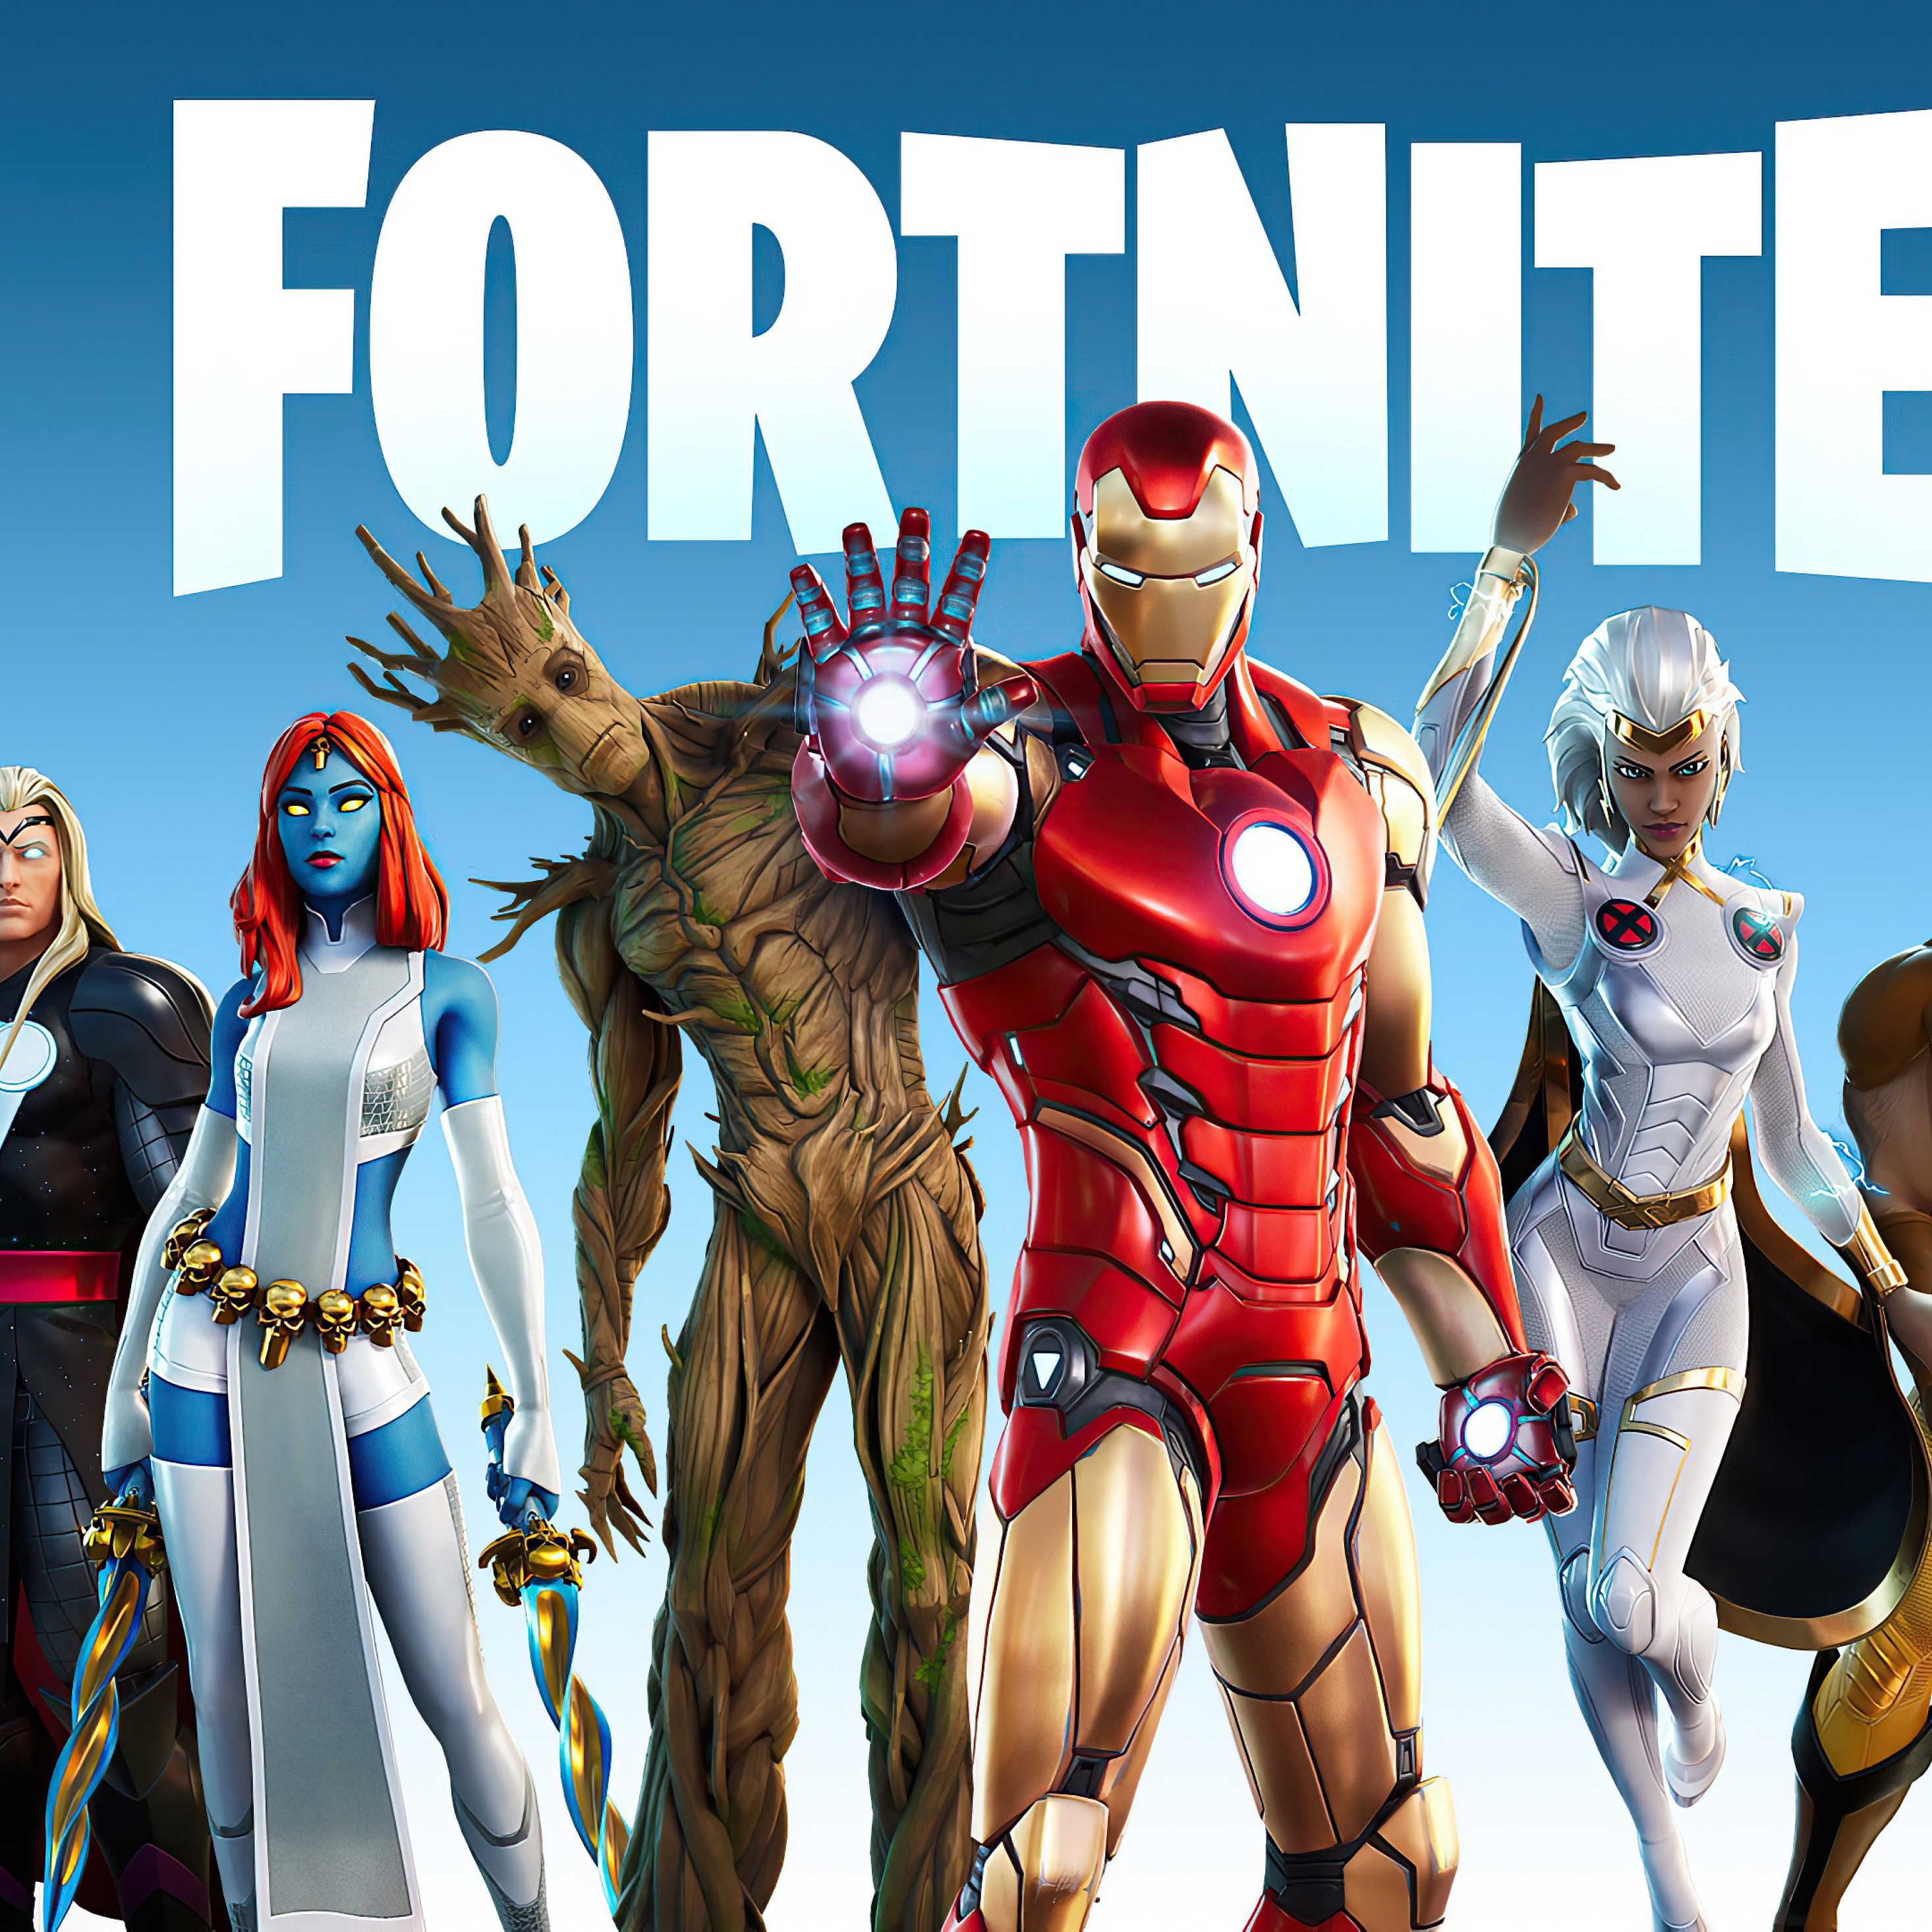 2932x2932 Fortnite Chapter 2 Season 4 Ipad Pro Retina Display Wallpaper Hd Games 4k Wallpapers Images Photos And Background Wallpapers Den